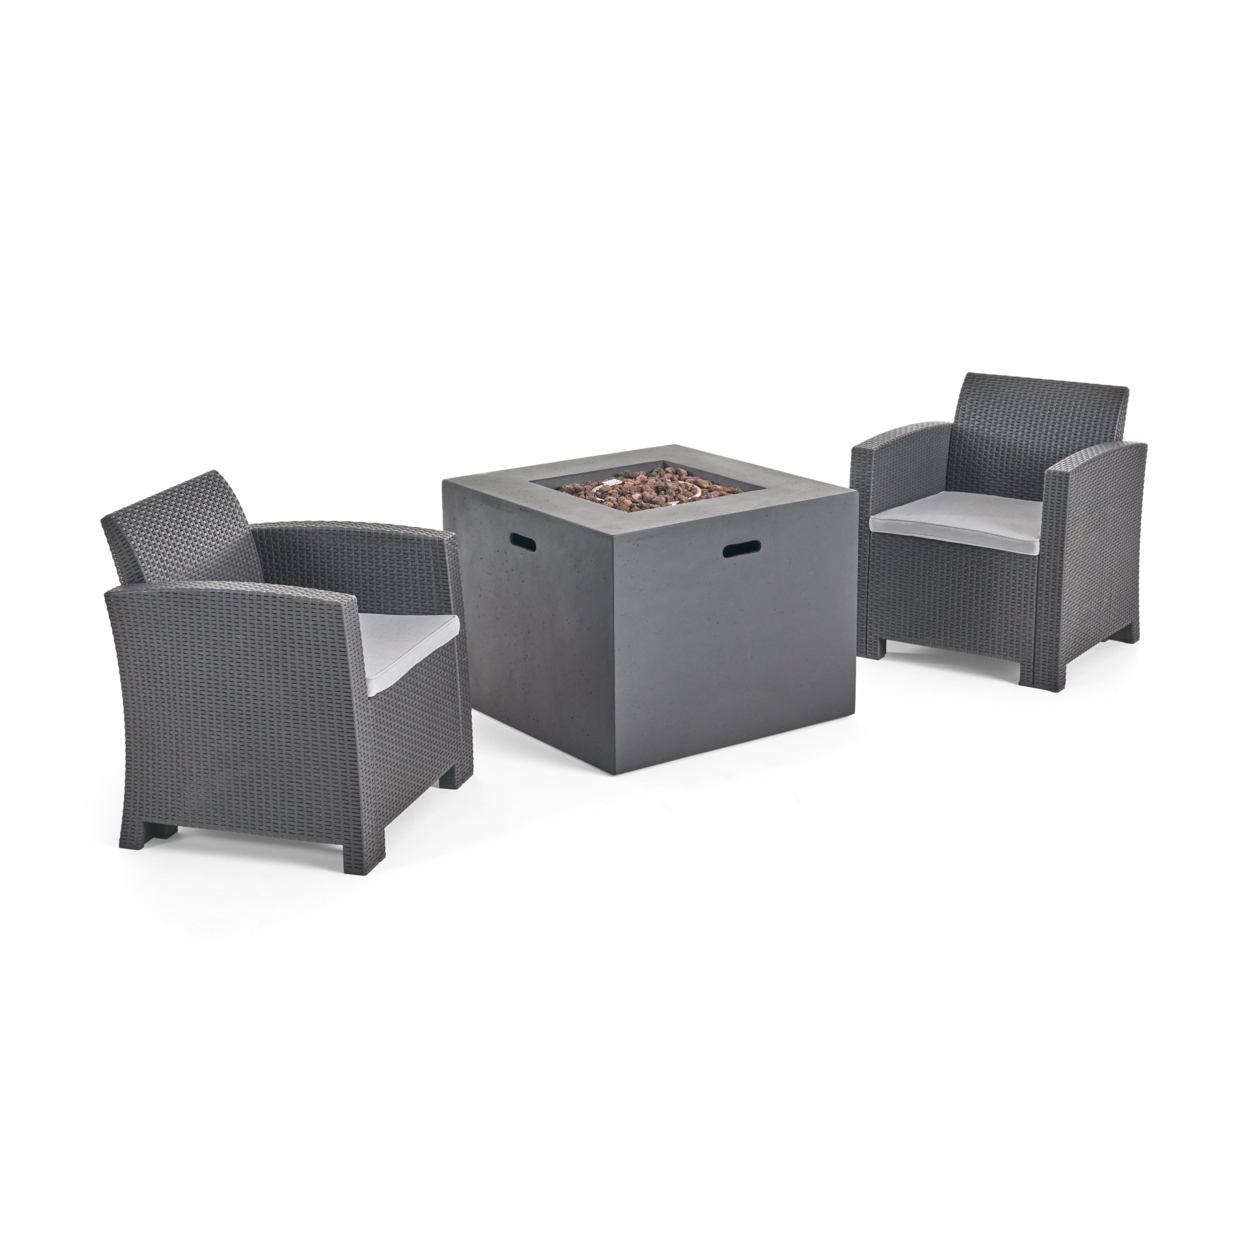 Agatha Outdoor Wicker Club Chair Chat Set With Propane Fire Pit - Charcoal + Light Gray